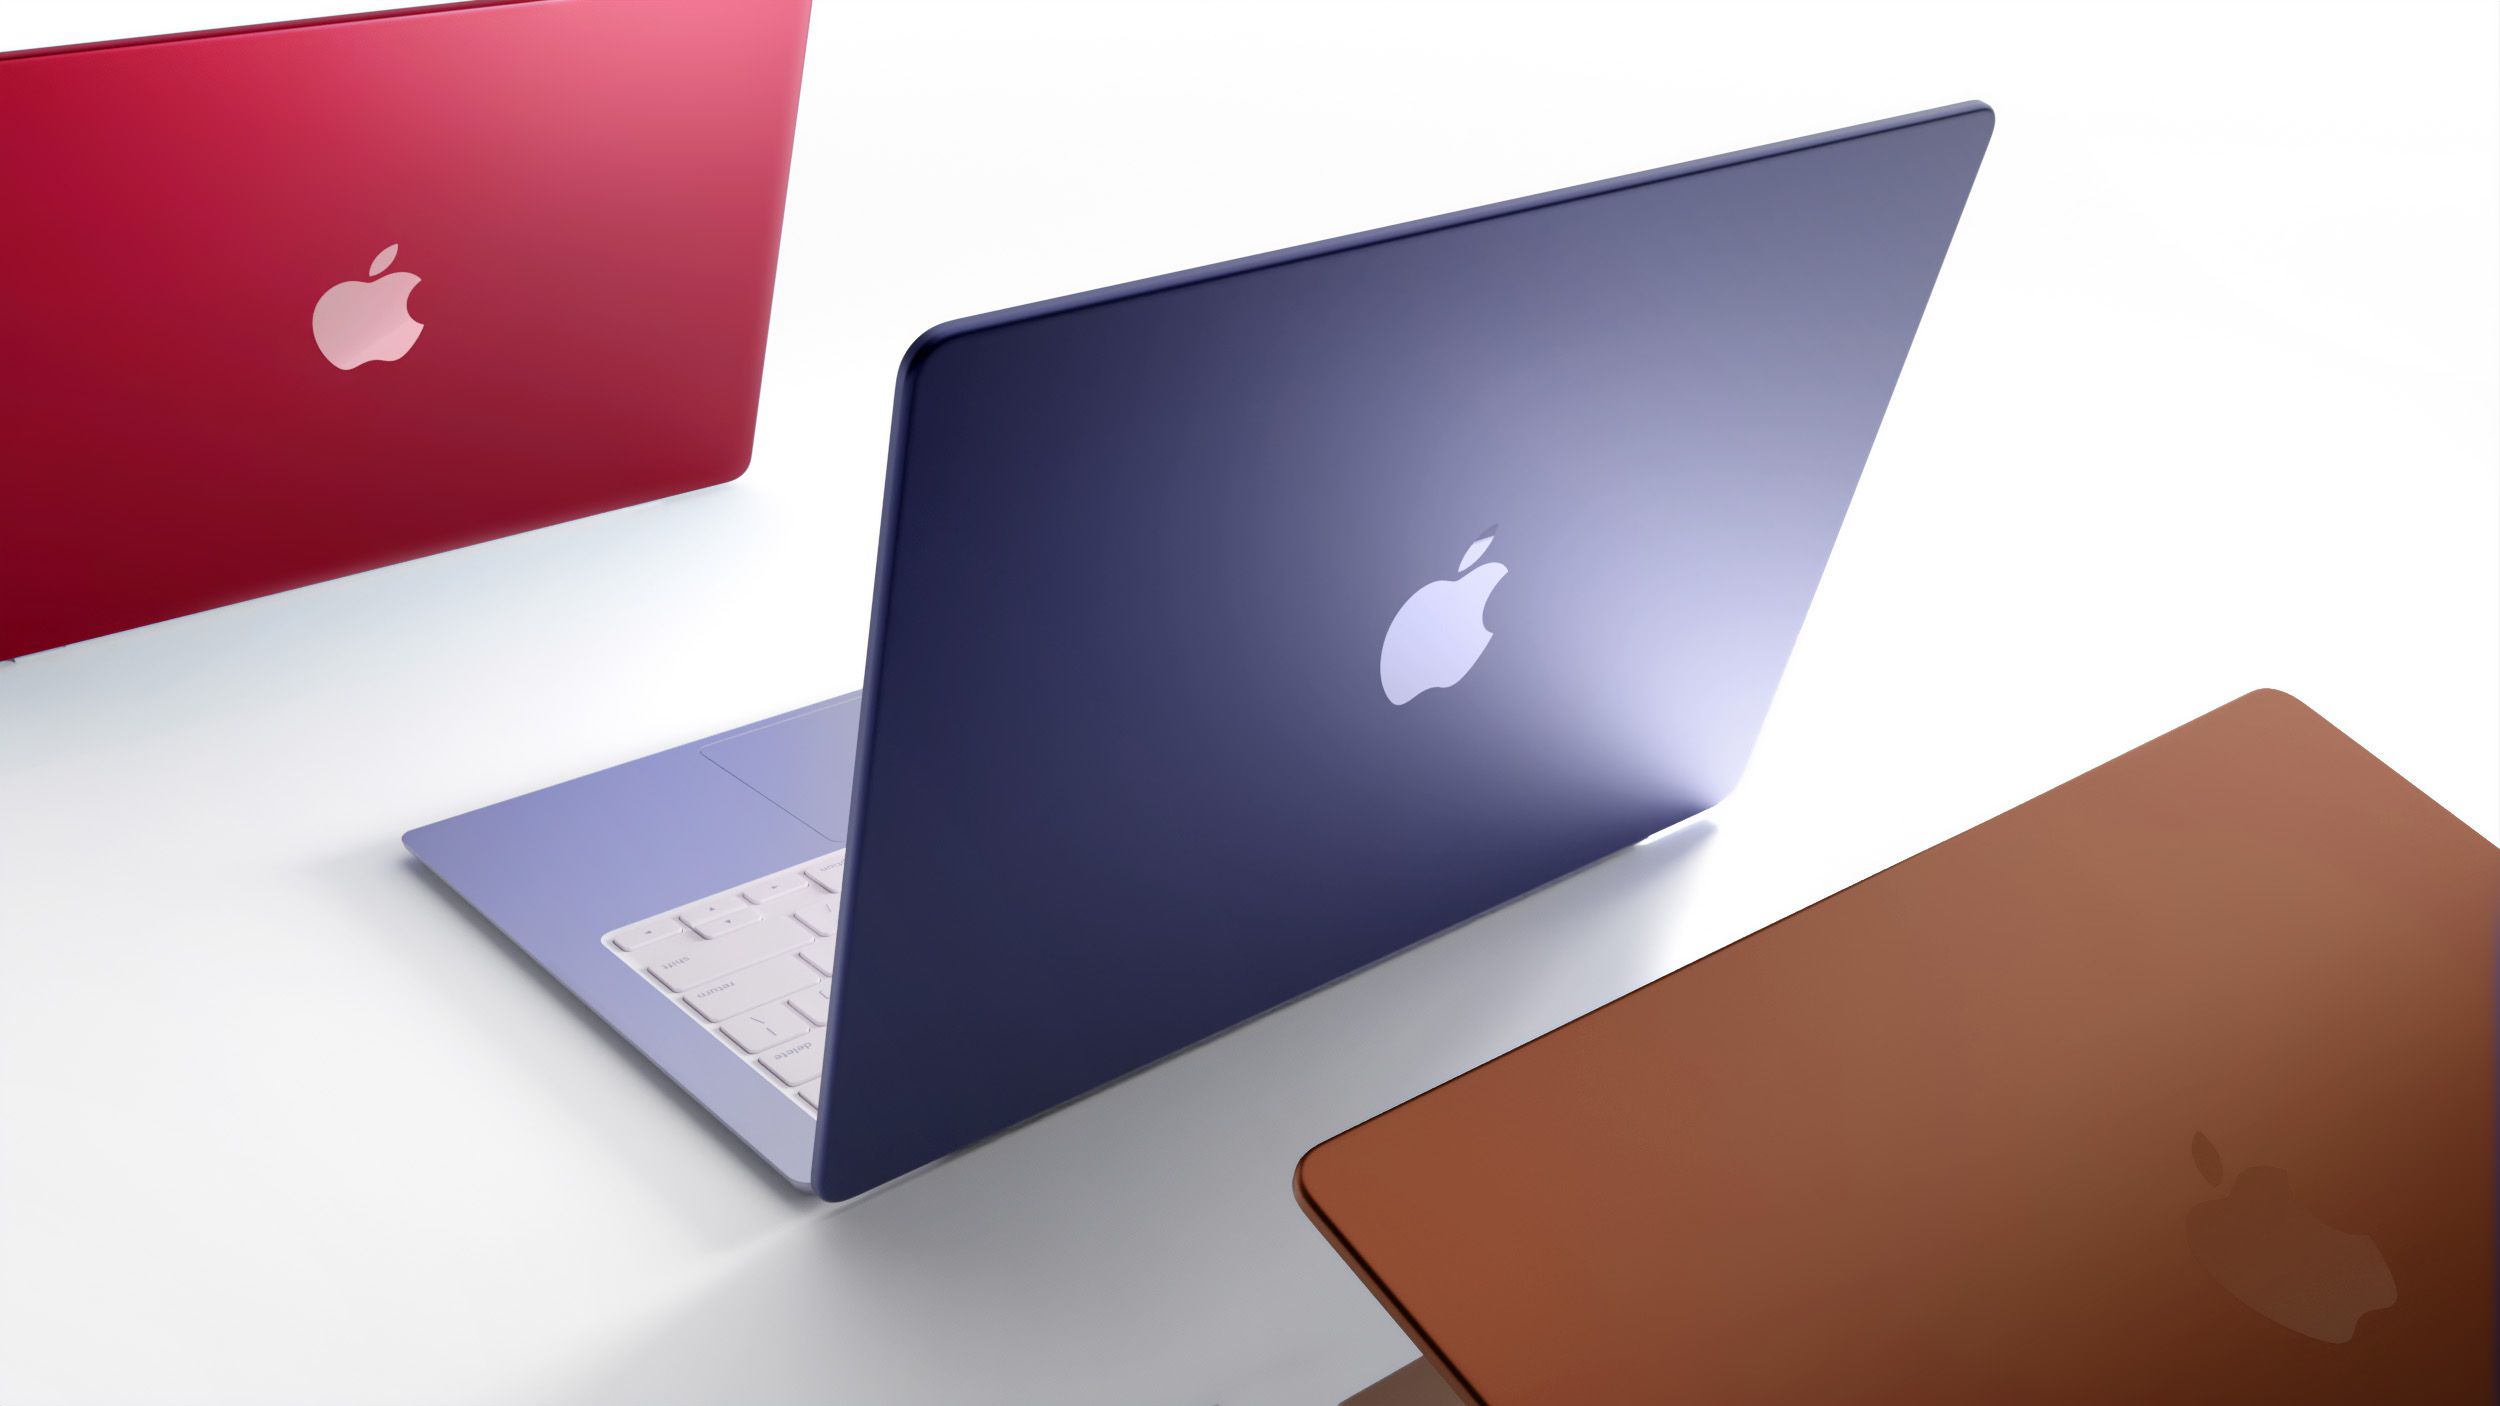 M2 MacBook Air Among Most Likely WWDC Hardware Announcements, AR/VR Headset Unli..